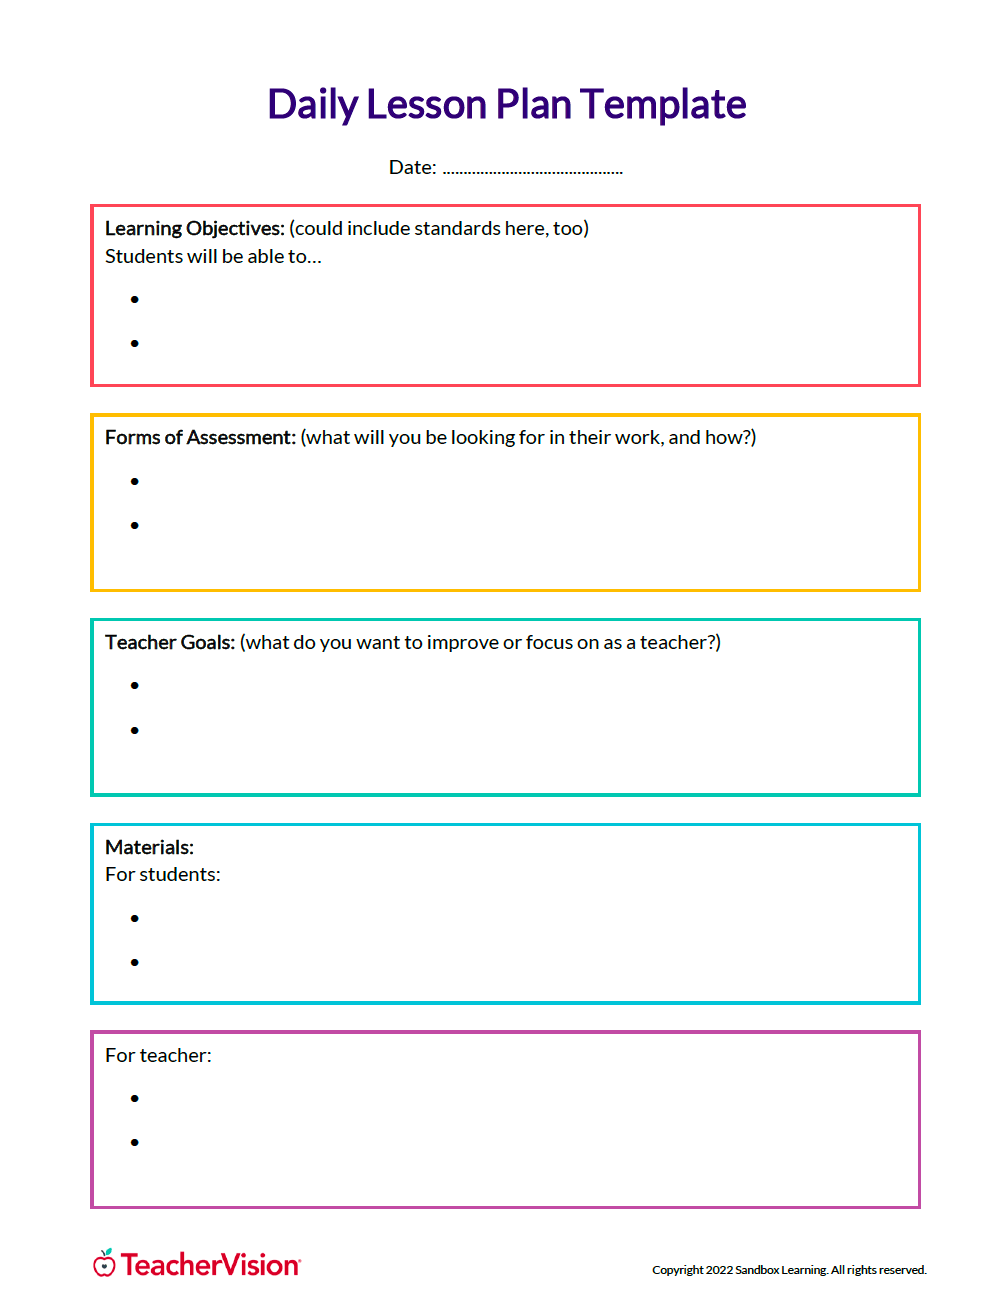 Lesson-Plan-daily-Template-for-Educators-Digital.png